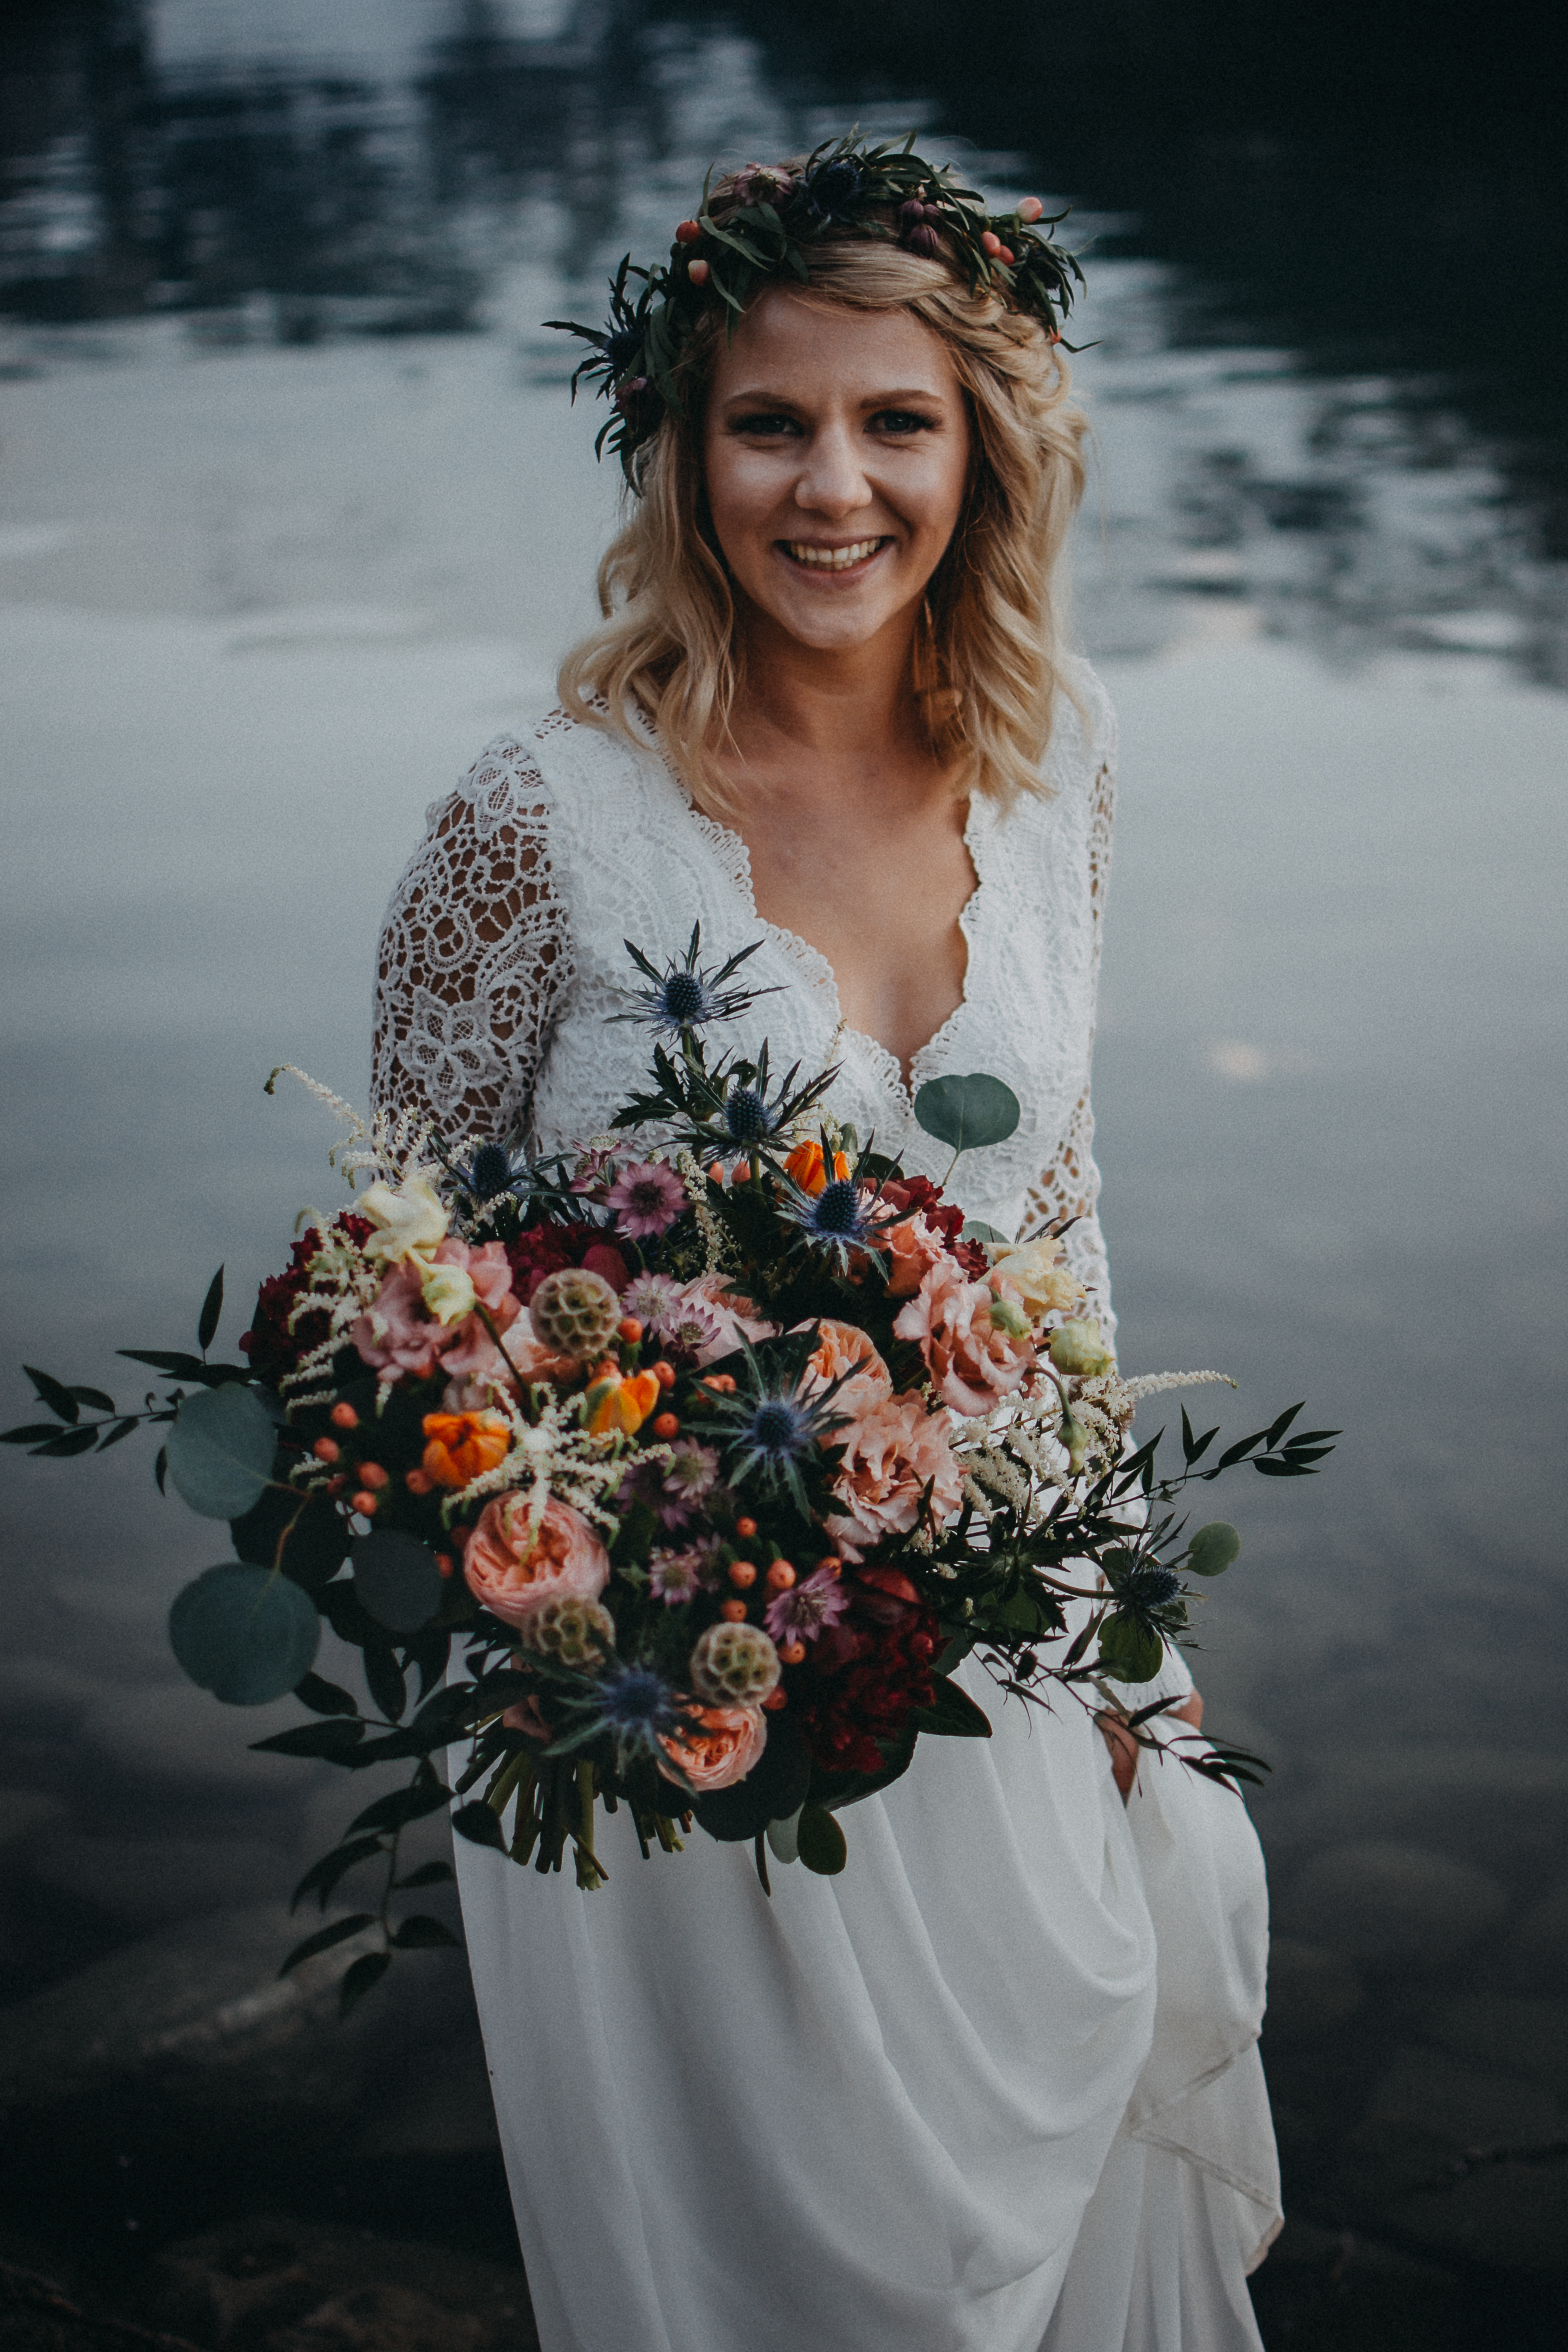 The bride holding her floral bouquet smiling at the camera at Lake Louise, Alberta